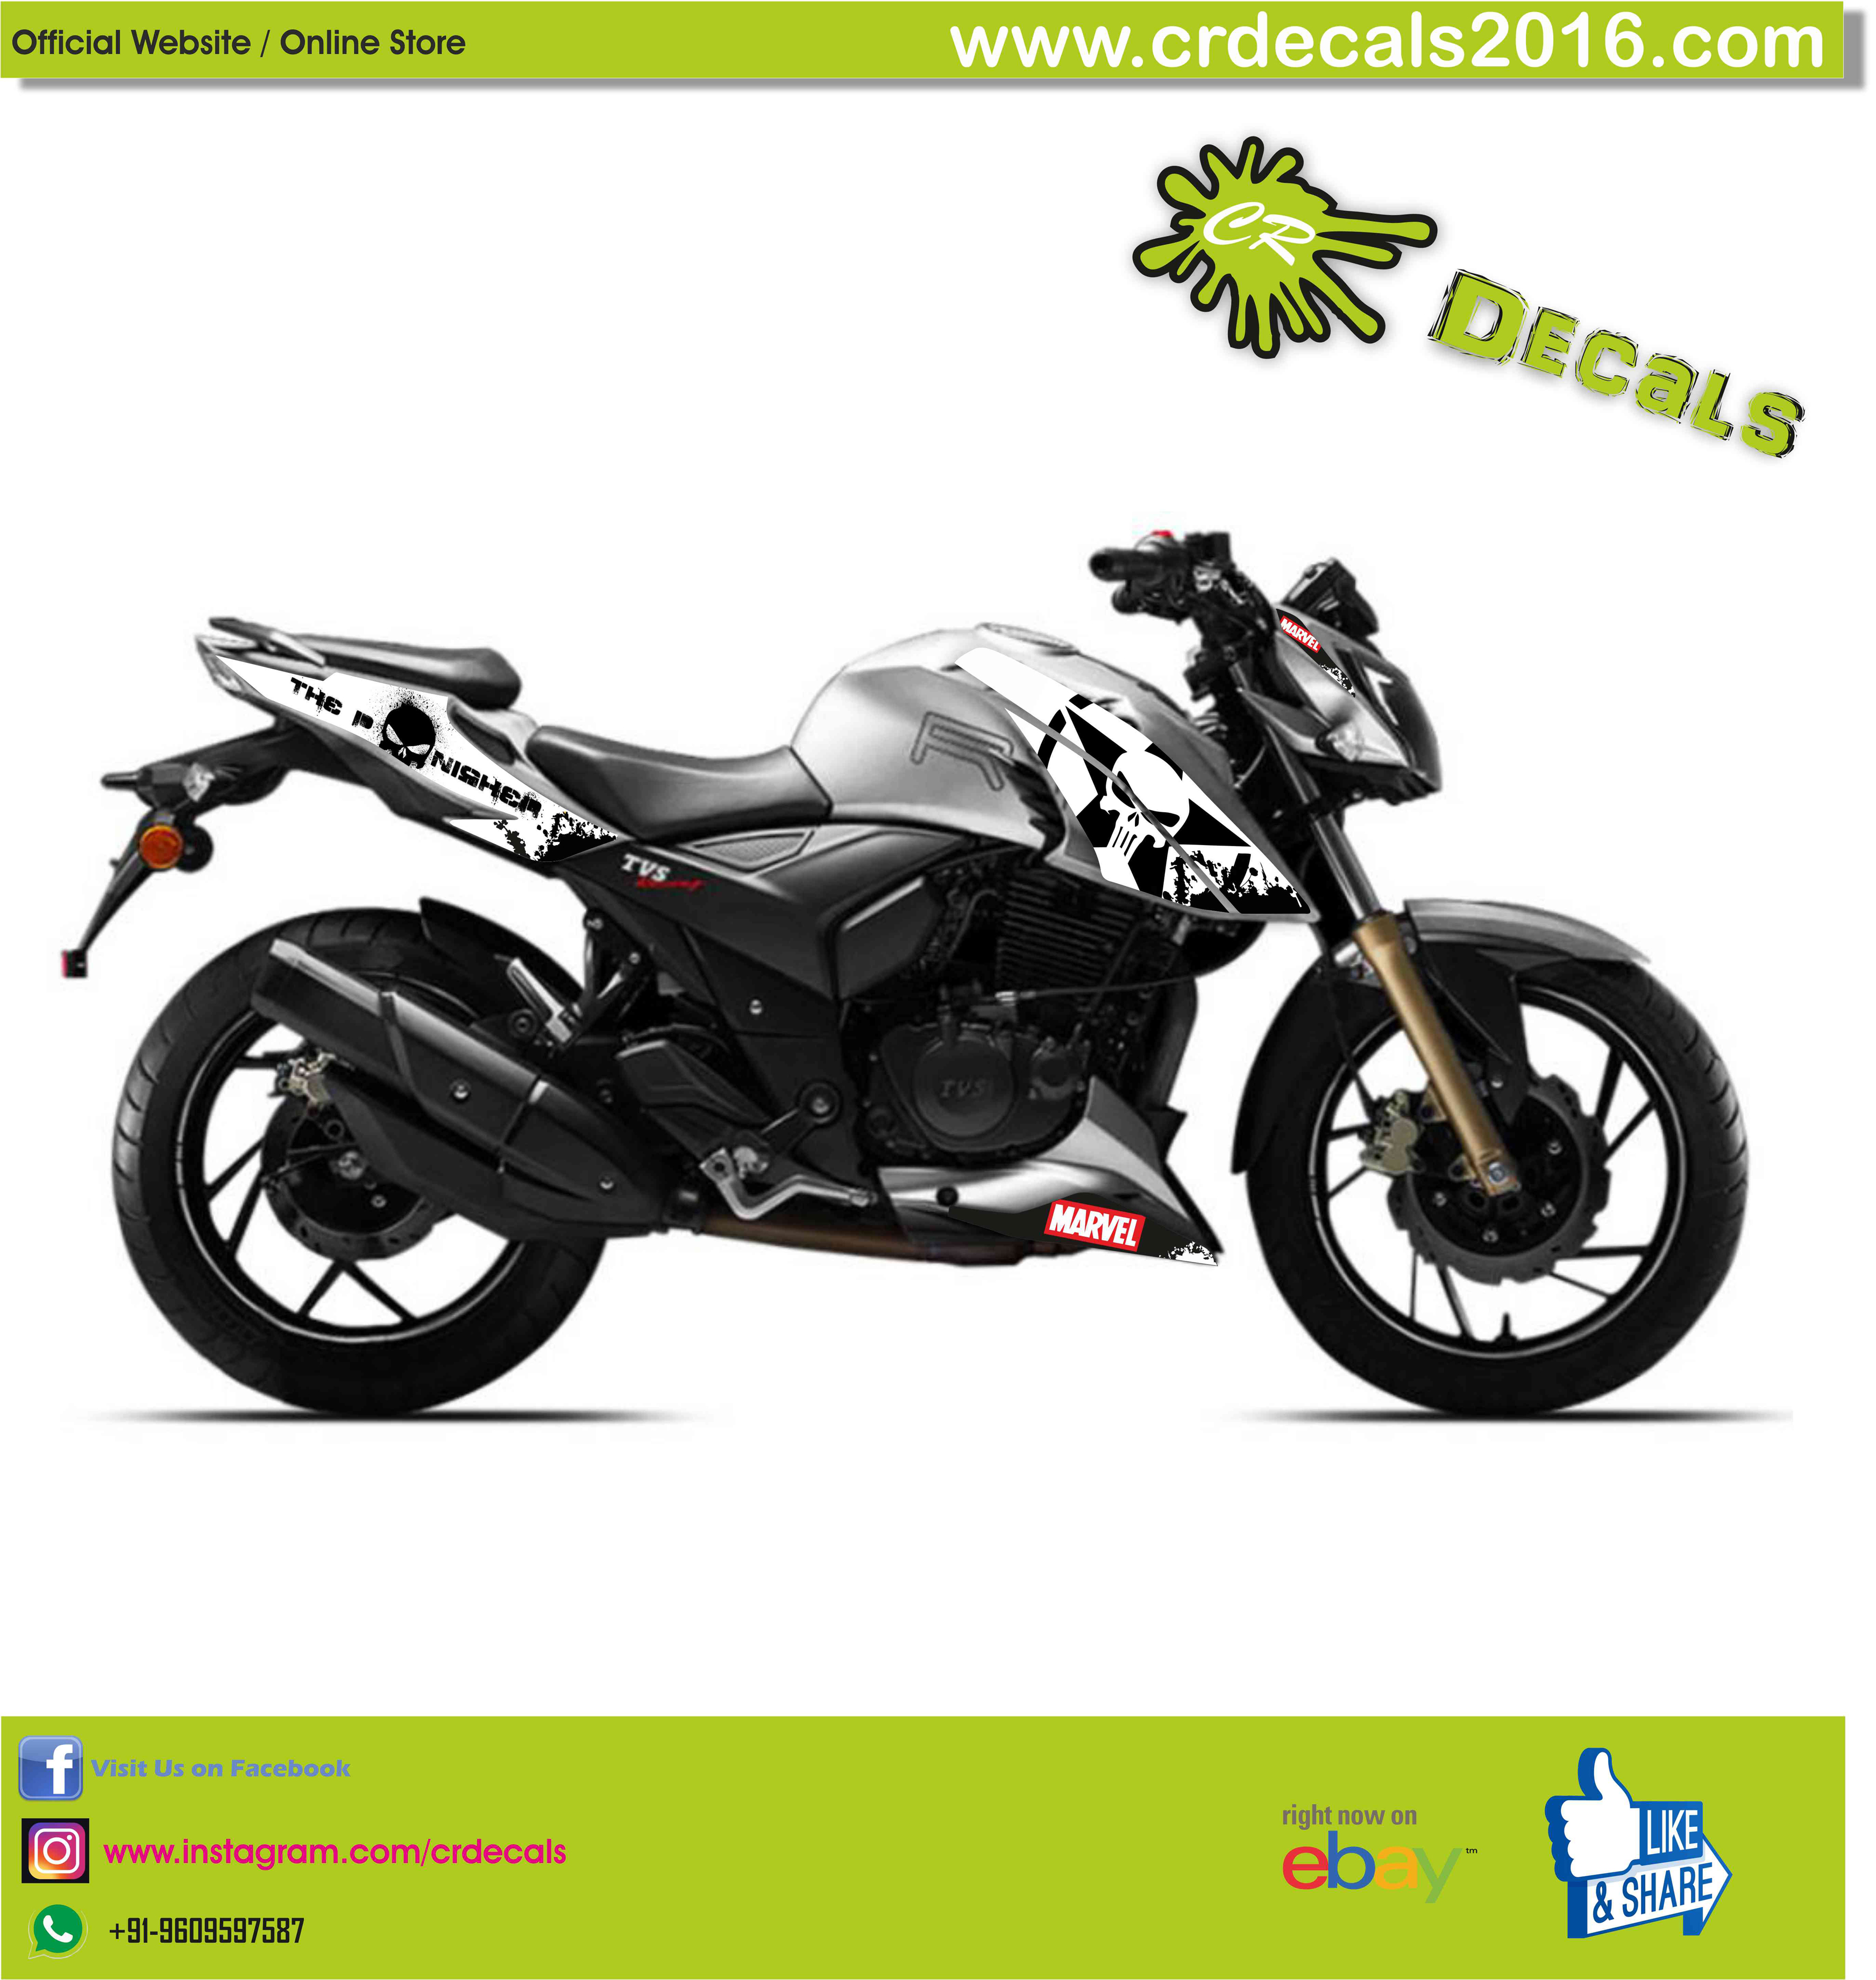 Tvs Apache Rtr 0 160 4v Custom Decals Wrap Stickers Punisher Skull Edition Kit Cr Decals Designs